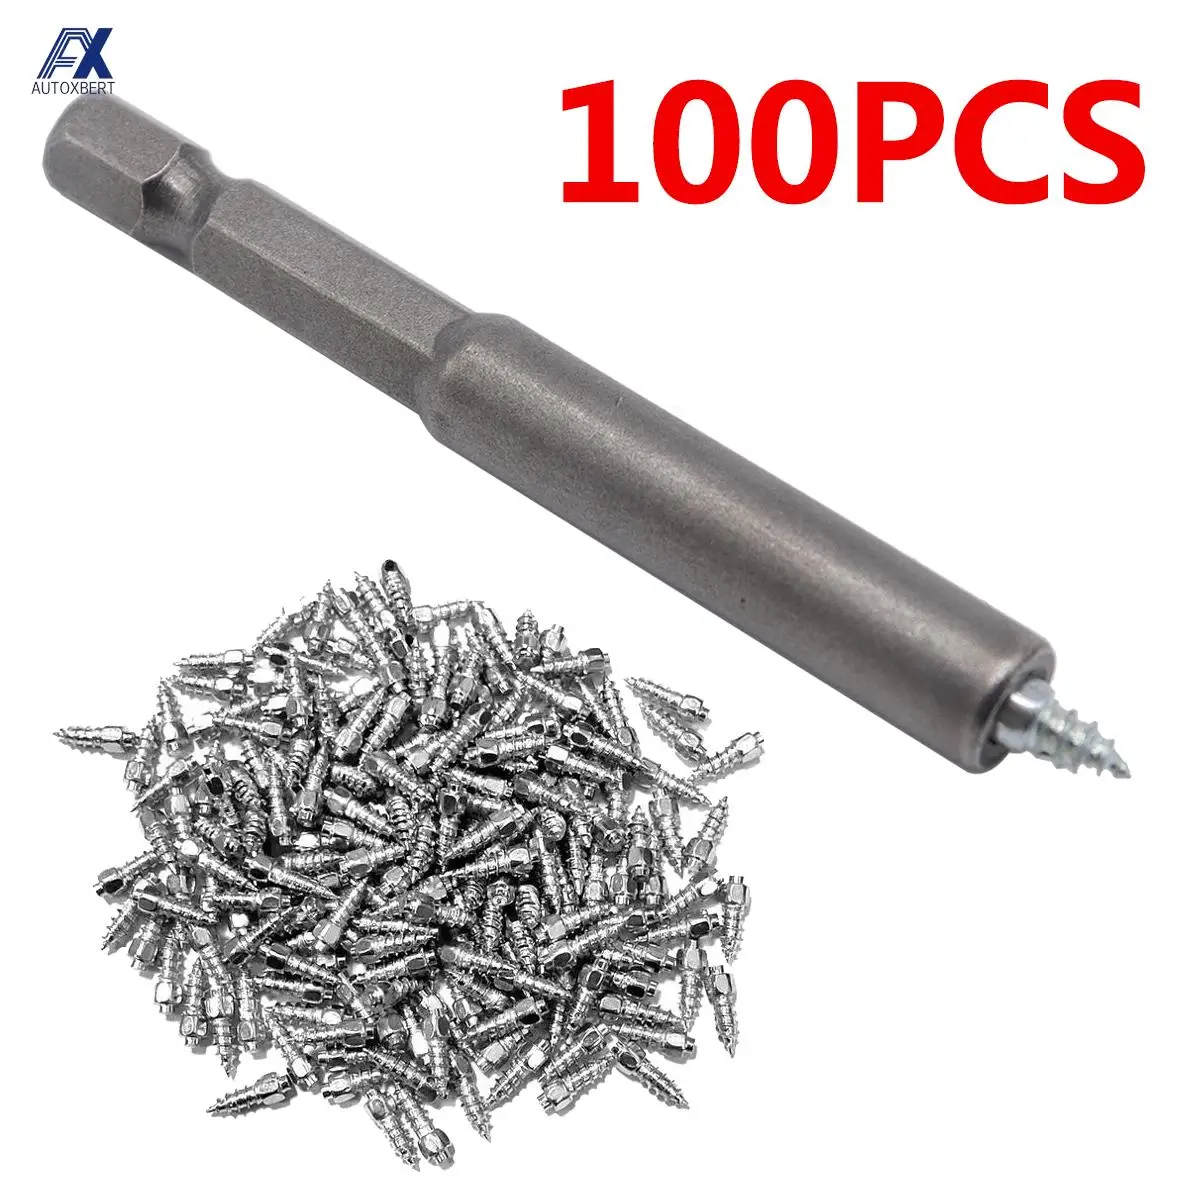 

100Pcs 4*9mm Snow Screw Tire Studs Anti Skid Falling Spikes Wheel Tyres For Car Motorcycle Bicycle Boots Winter Emergency